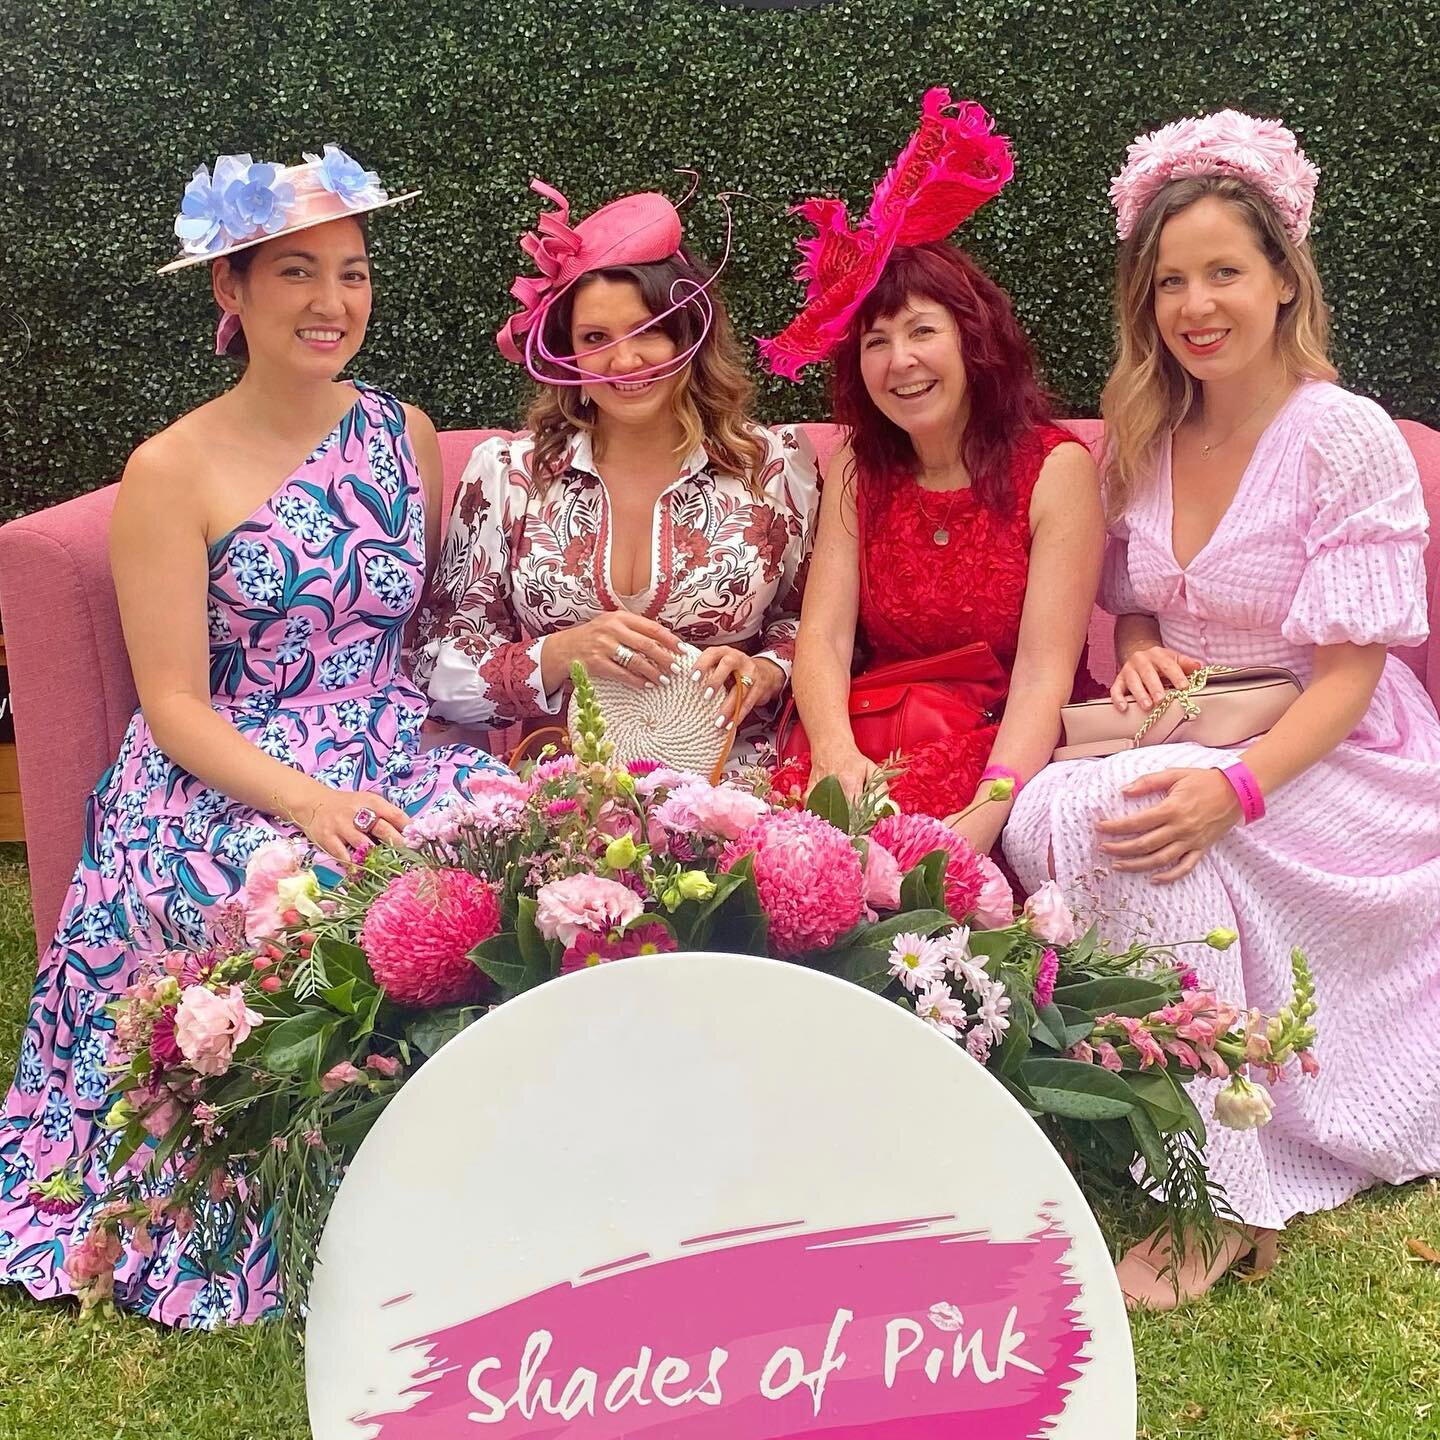 A fabulous day out at @shadesofpinkau Diamond Raceday 💕💕💕 @yarravalleyracing 🏇
Amazing work  @katcoopersmith on such a great event raising funds for Eastern Health Breast and Cancer Centre 👏👏👏 

#shadesofpink #yarravalley #horseracing #raceday